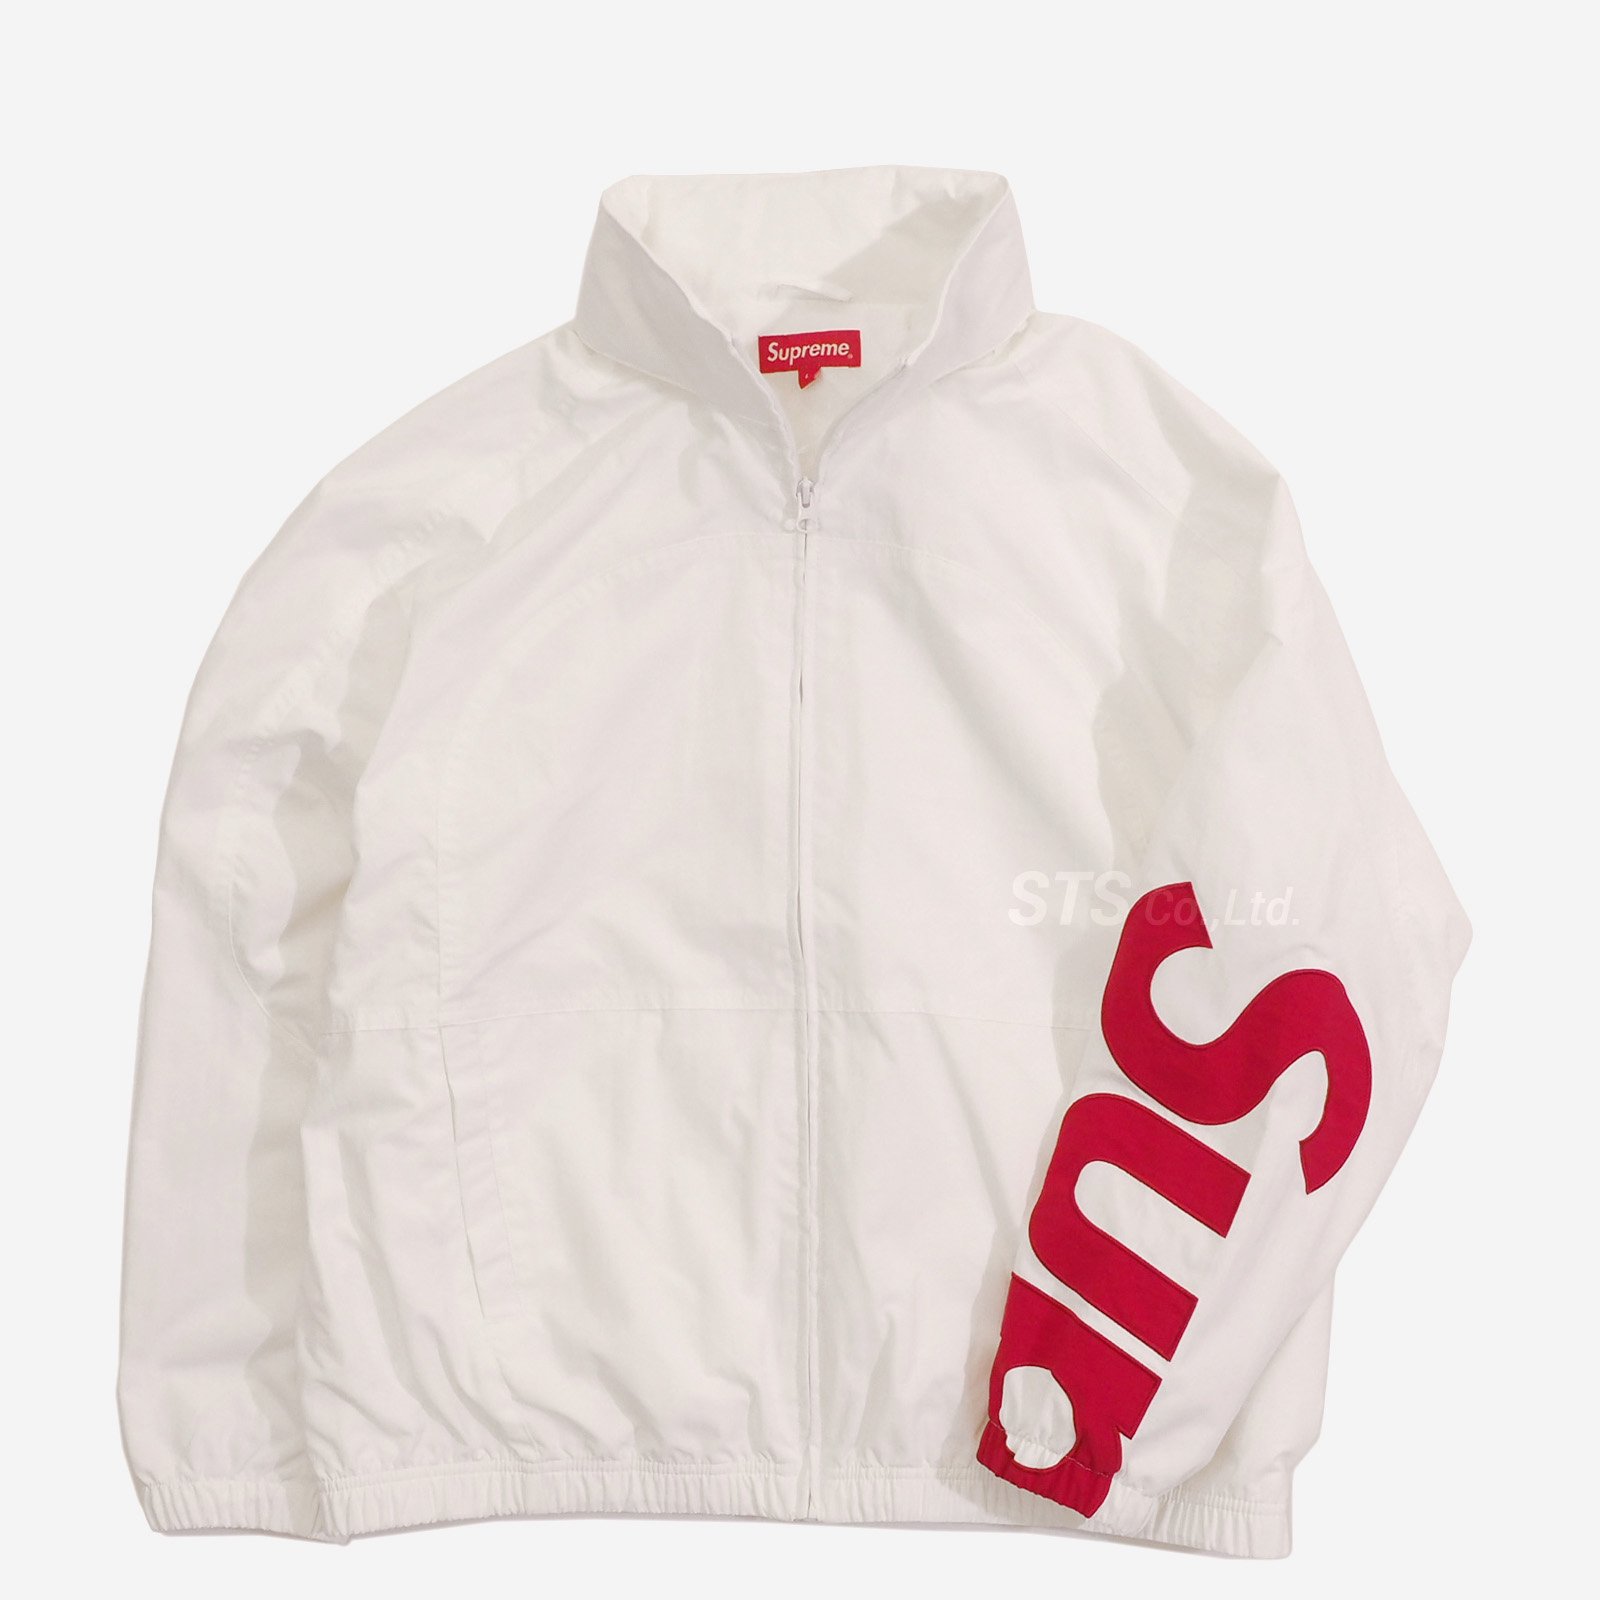 Supreme Spellout Track Jacket シュプリーム XL